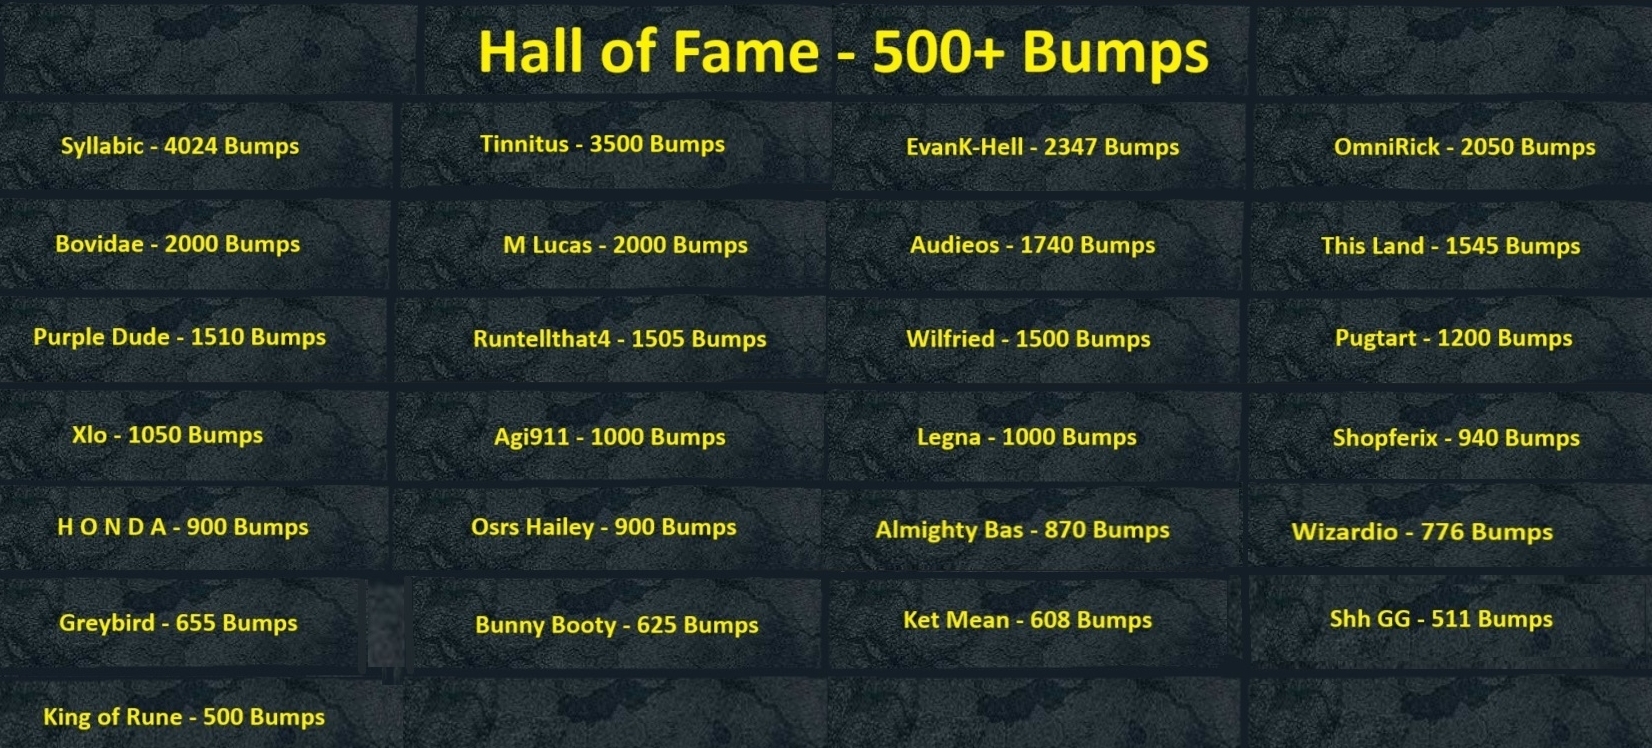 A TRIBUTE TO OUR BUMPERS DURING THE YEARS 39f86db2deca2f8adbb7c962a7d68b7c